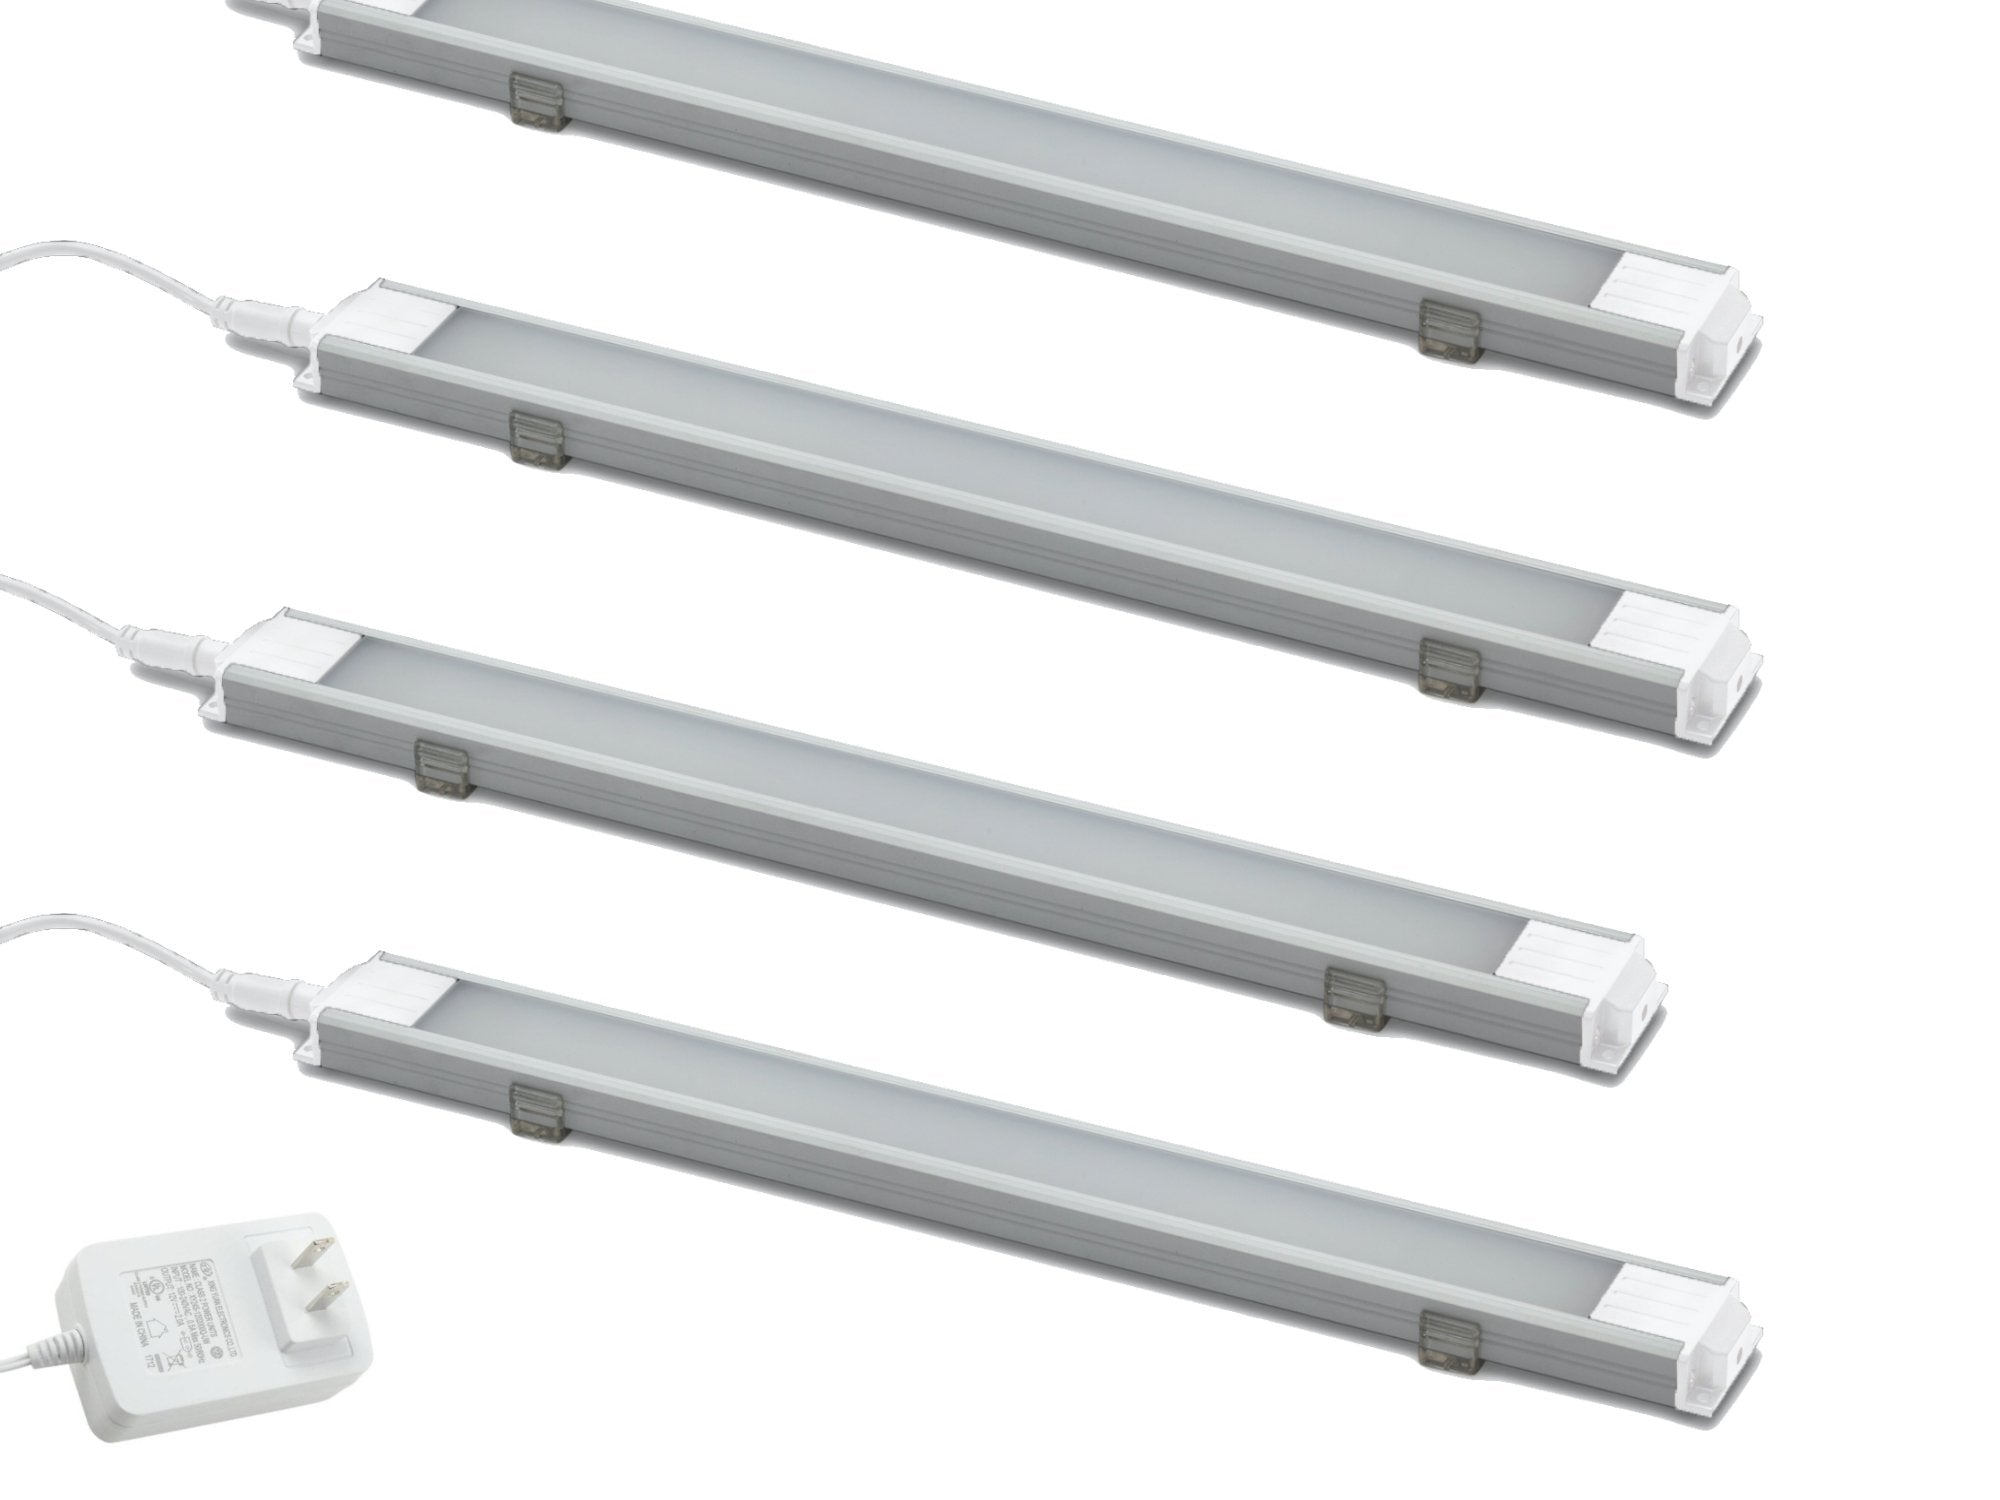 LED Display Lights (1 x Light Adapters, 3 x Light Extensions)